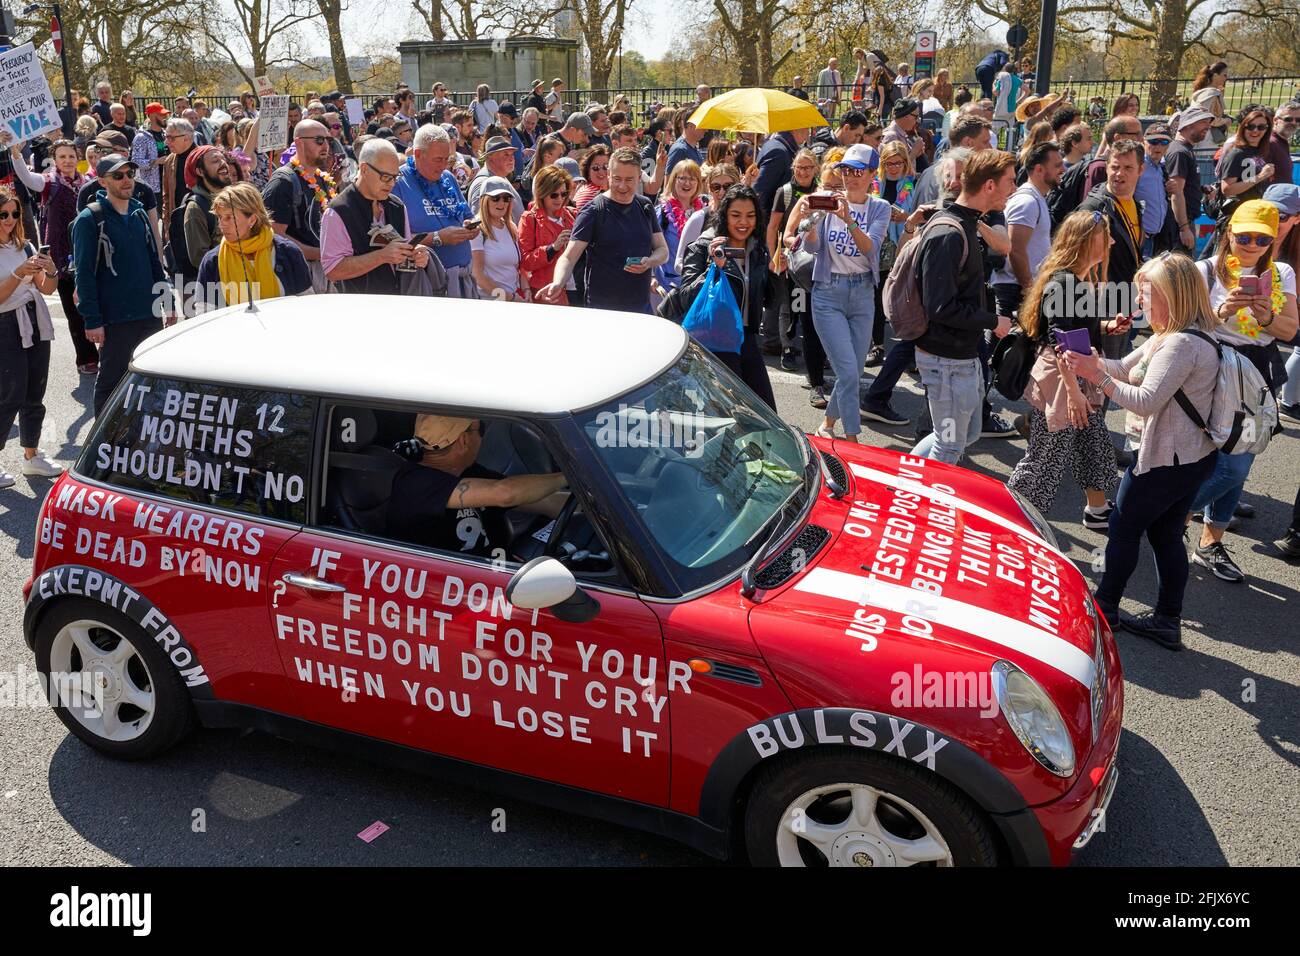 London, UK - 24 Apr 2021: A demonstrator uses his car ro send a message during a protest in central London calling for a lifting of all coronavirus restrictions. Stock Photo